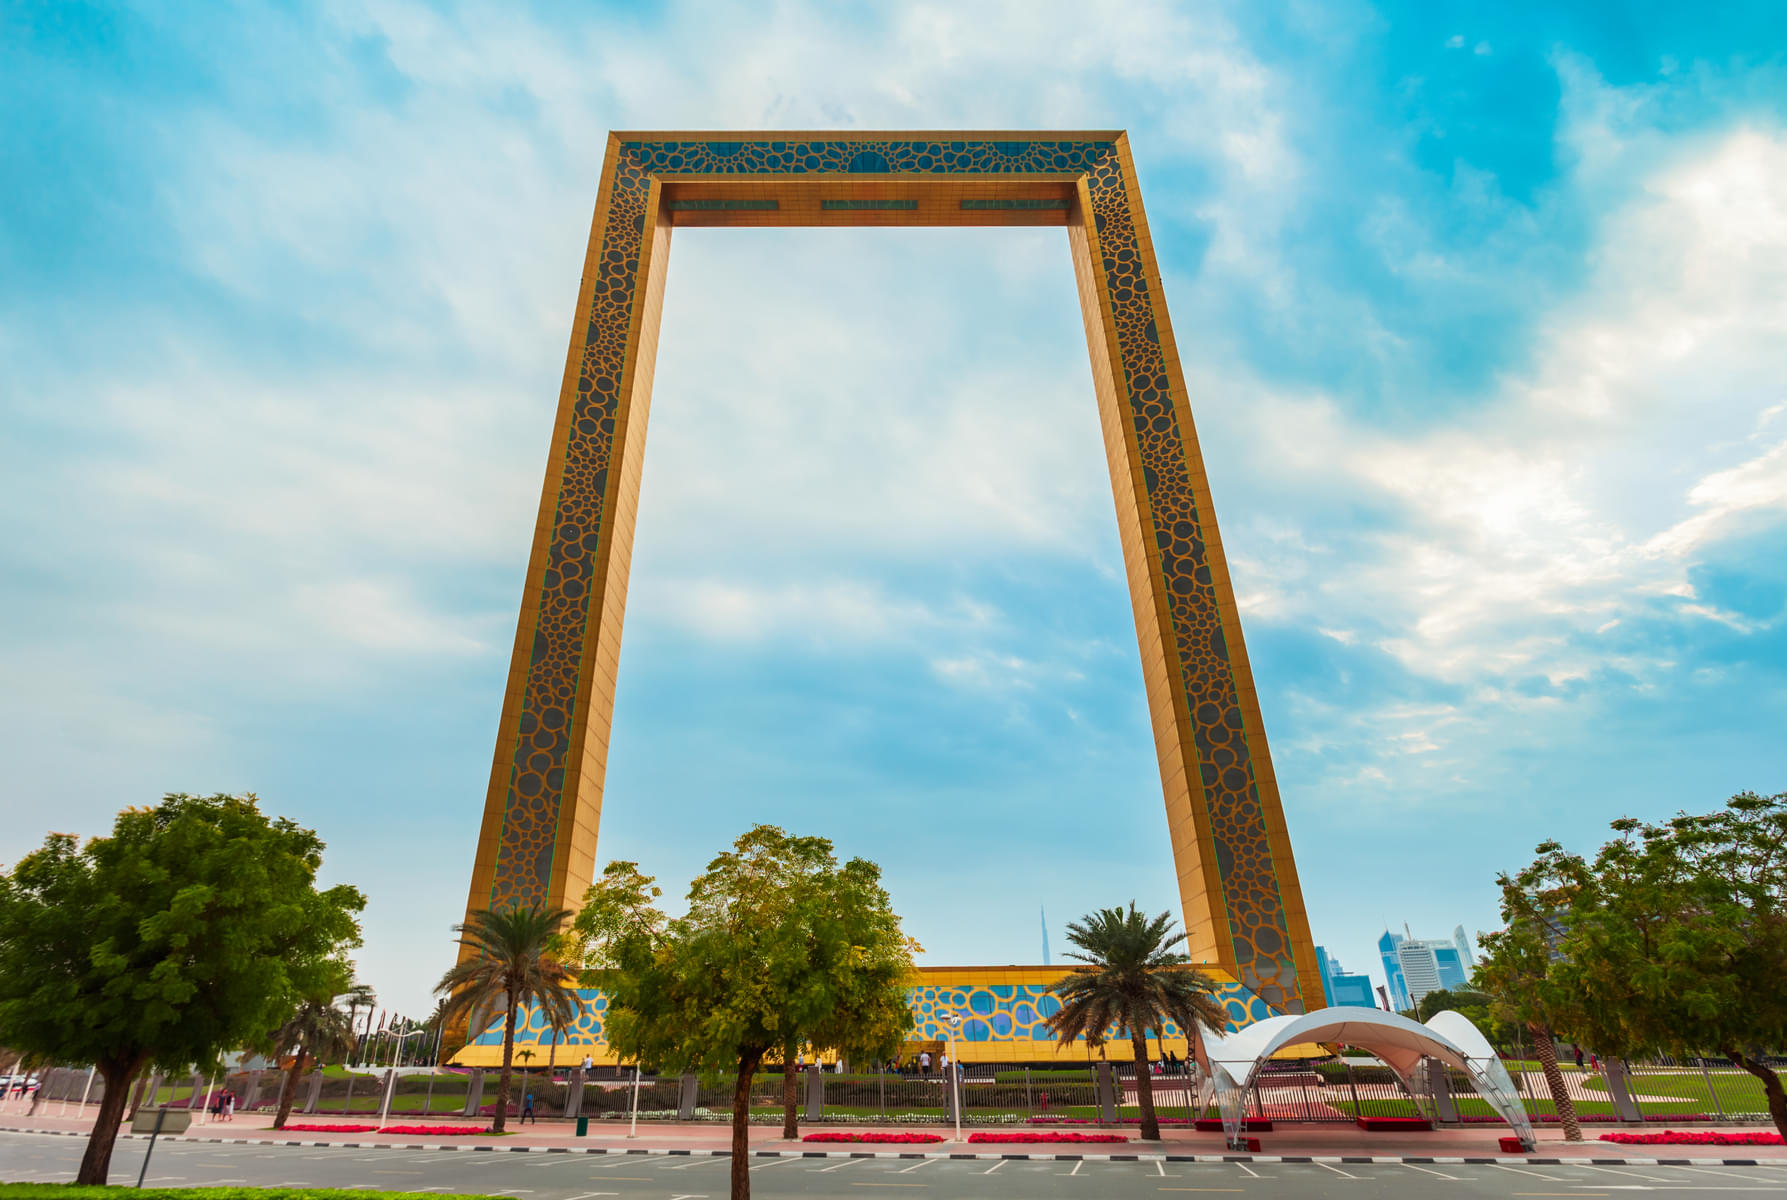 See the world's most giant frame of 150 m height & 93 m width